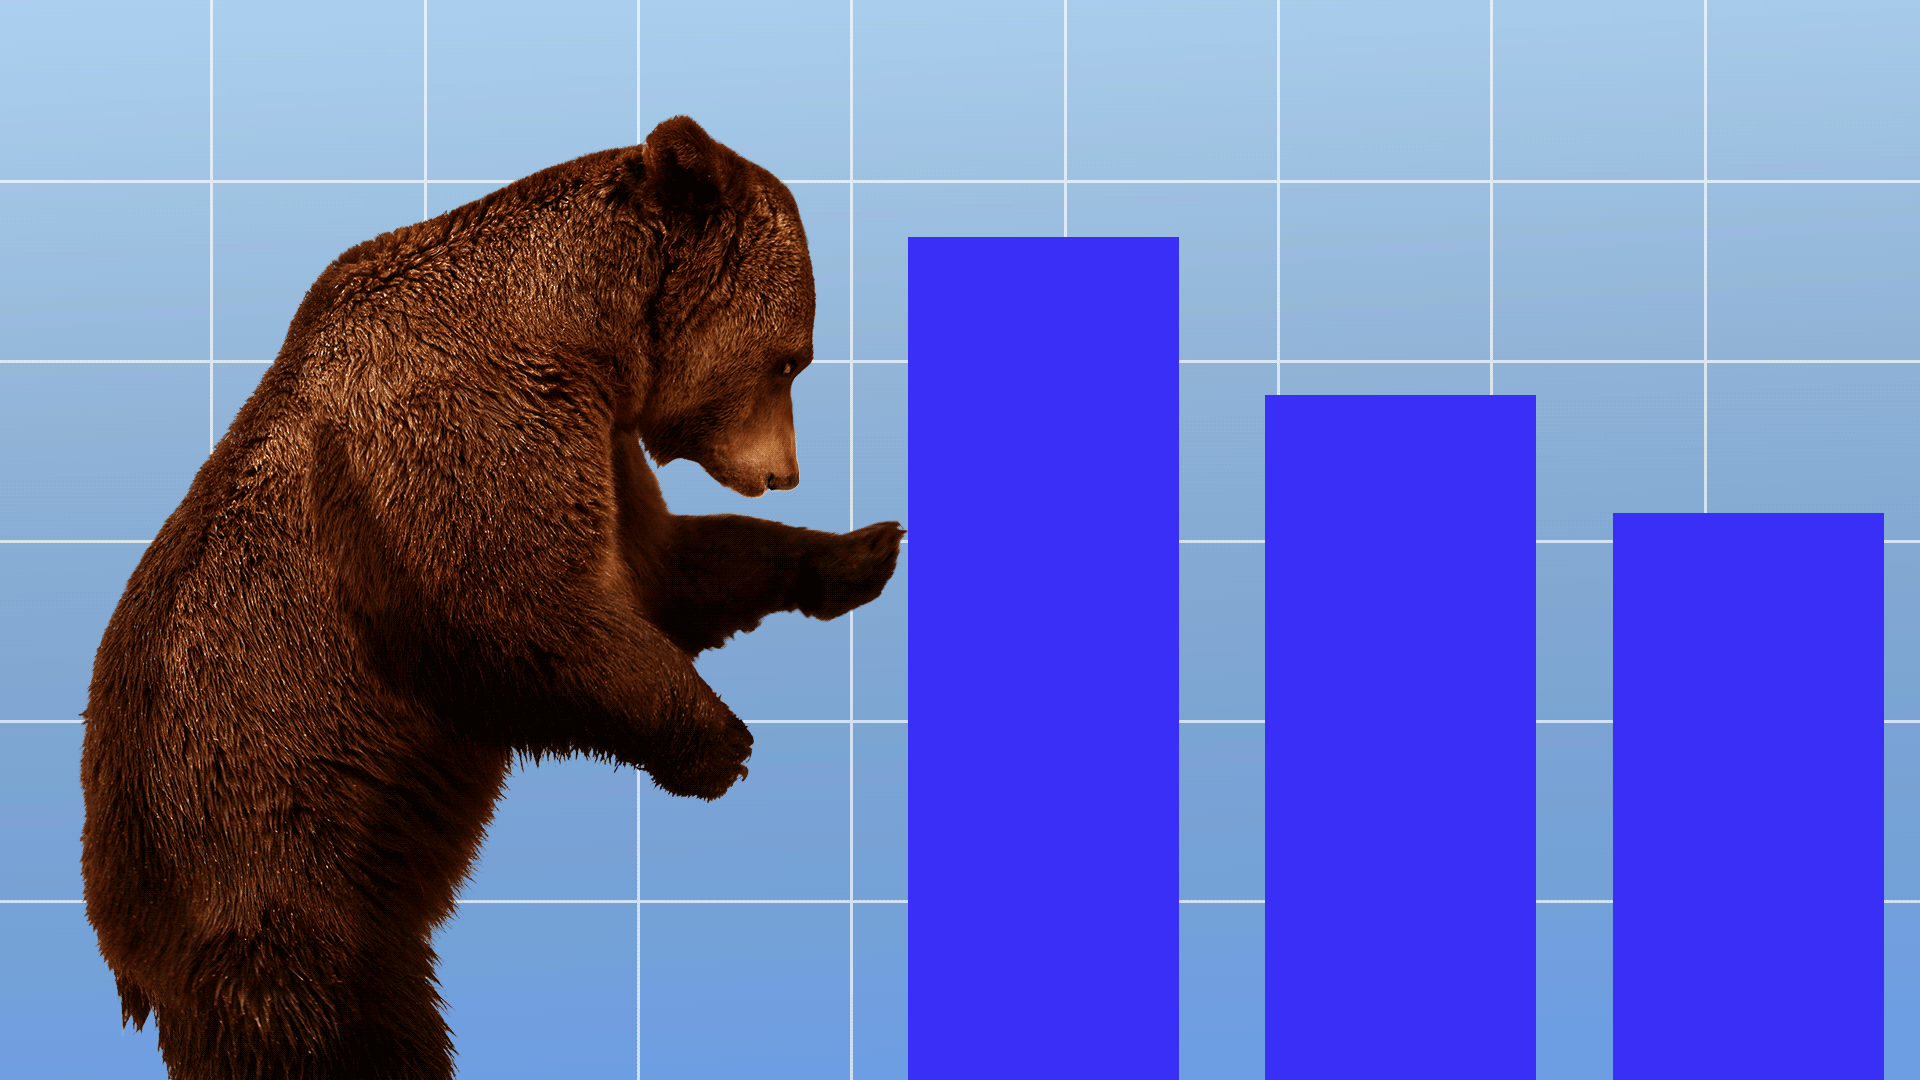 Illustration of a bear knocking over bars of a graph like dominos.